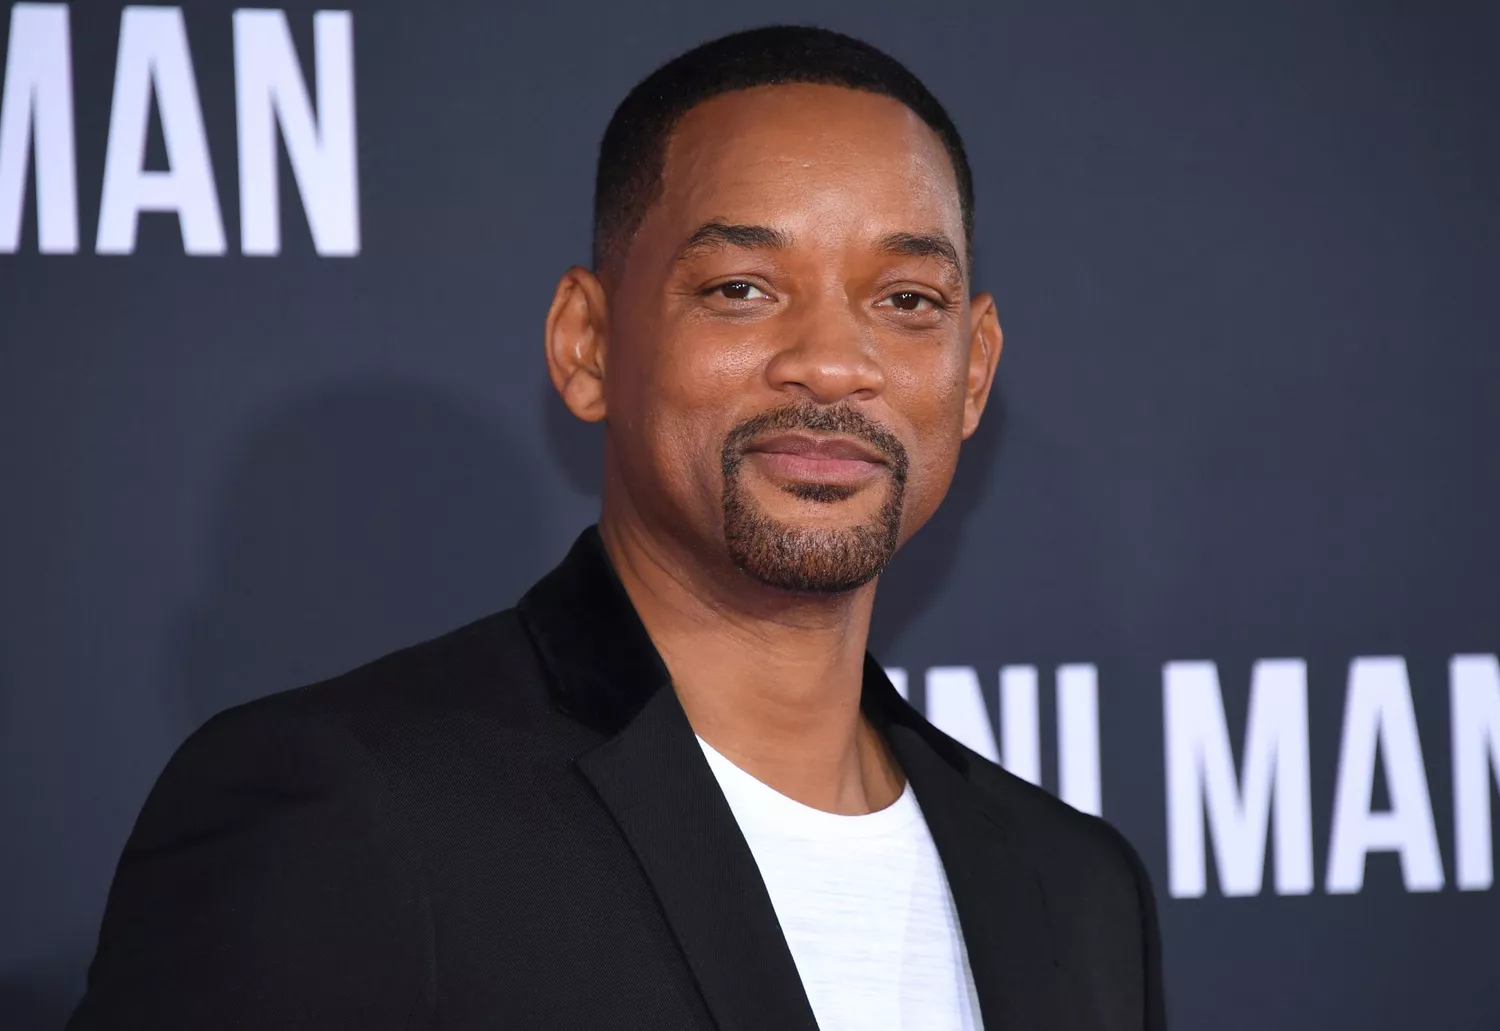 Will Smith Discusses Floyd Mayweather'S Support For Him Following The Oscars Slap, Yours Truly, News, February 7, 2023